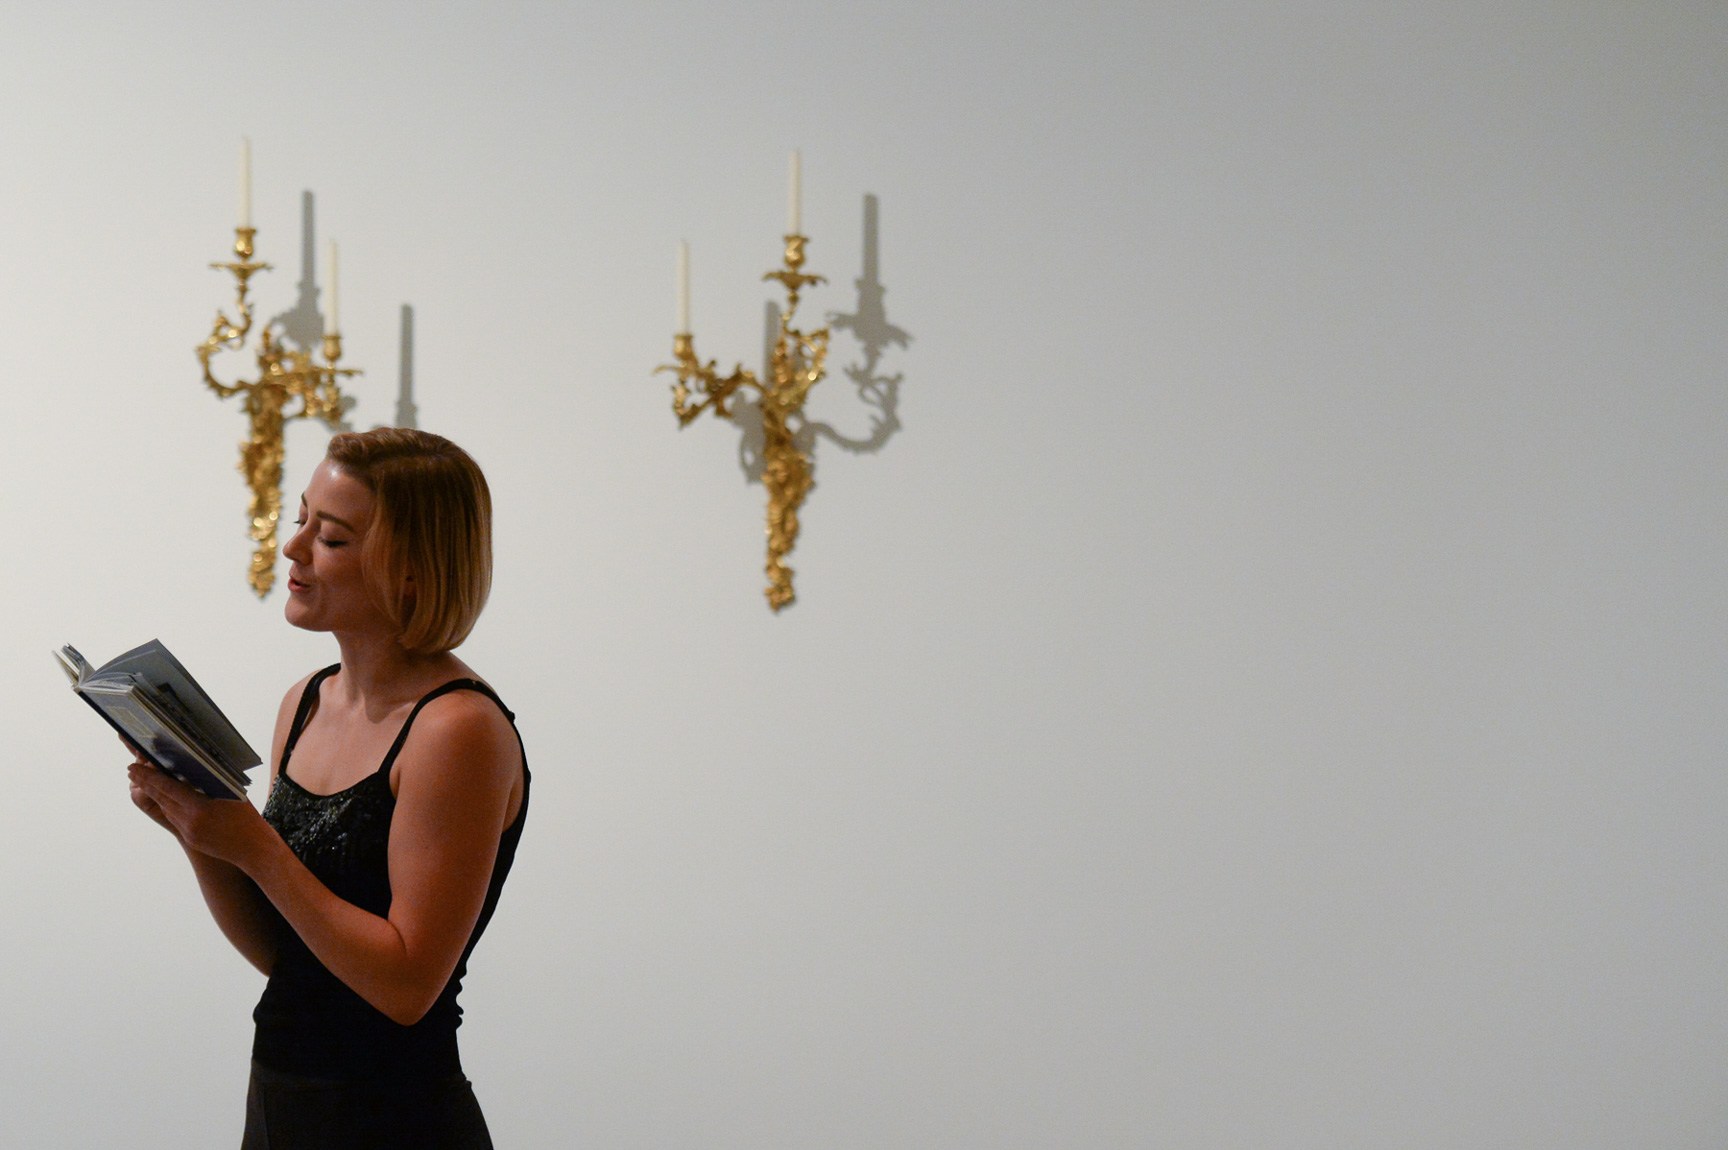 A presenter reads from "La Petite Maison" in front of two wall candelabra.